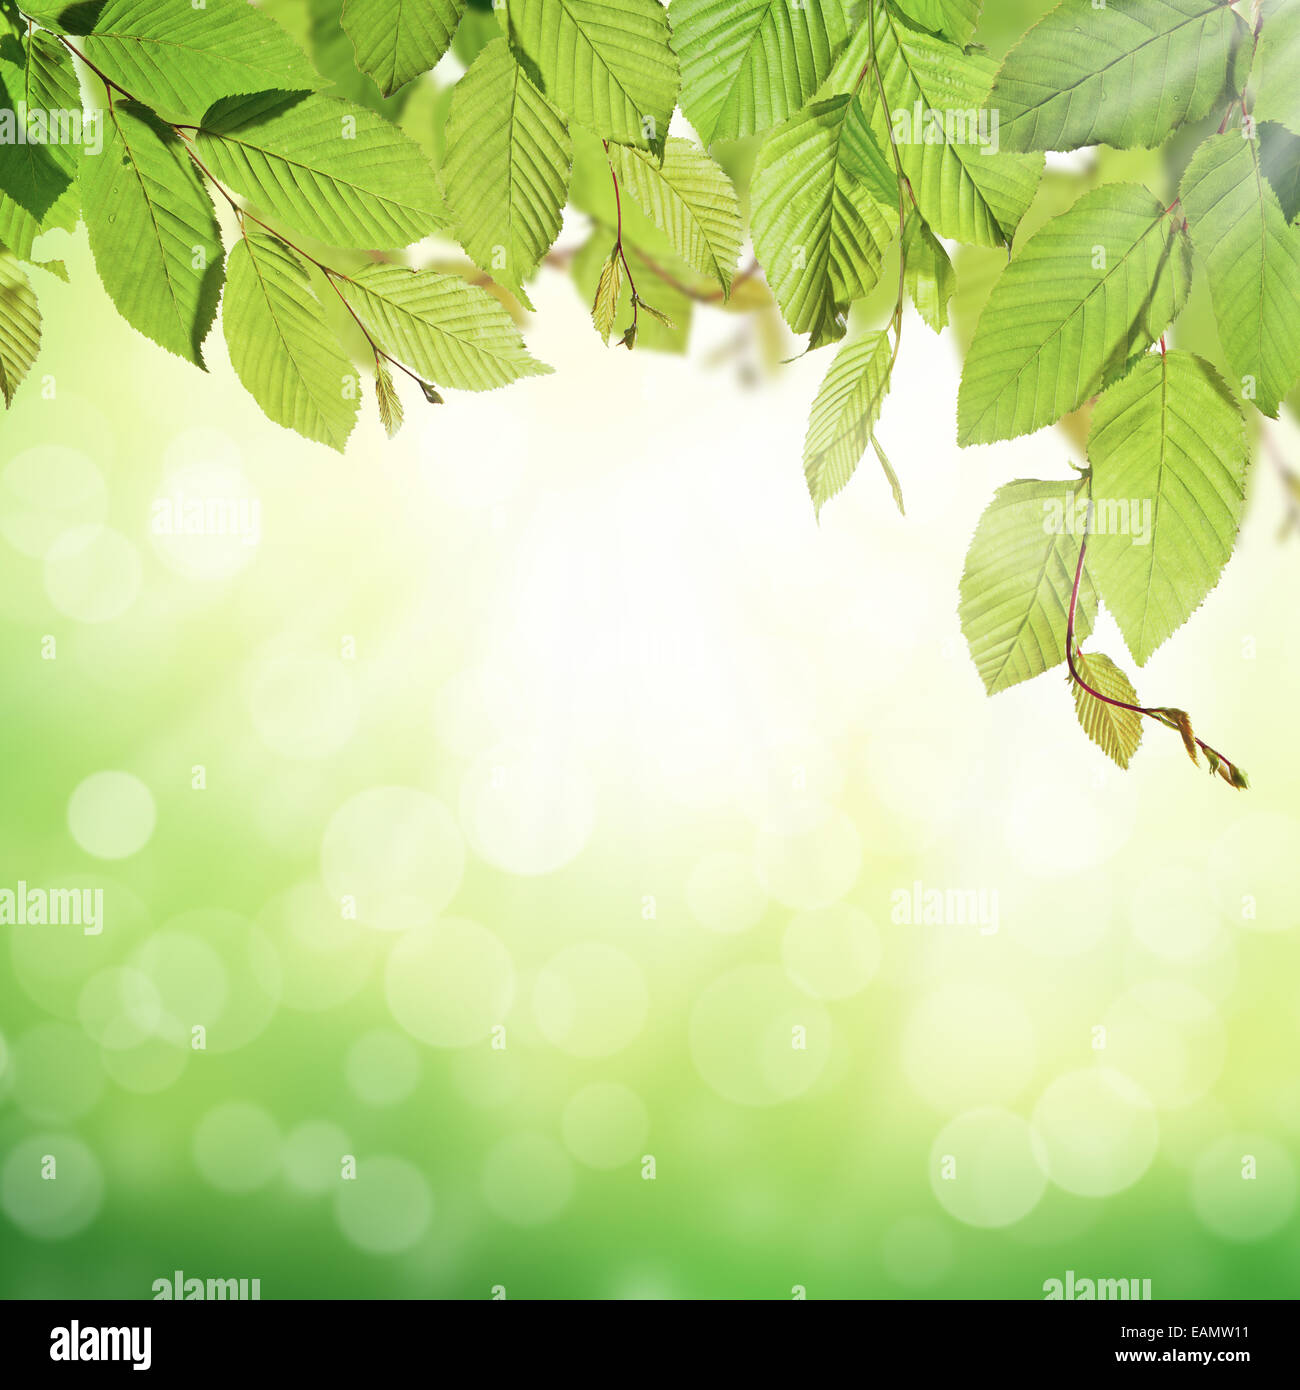 Hornbeam leaves with abstract blur background Stock Photo